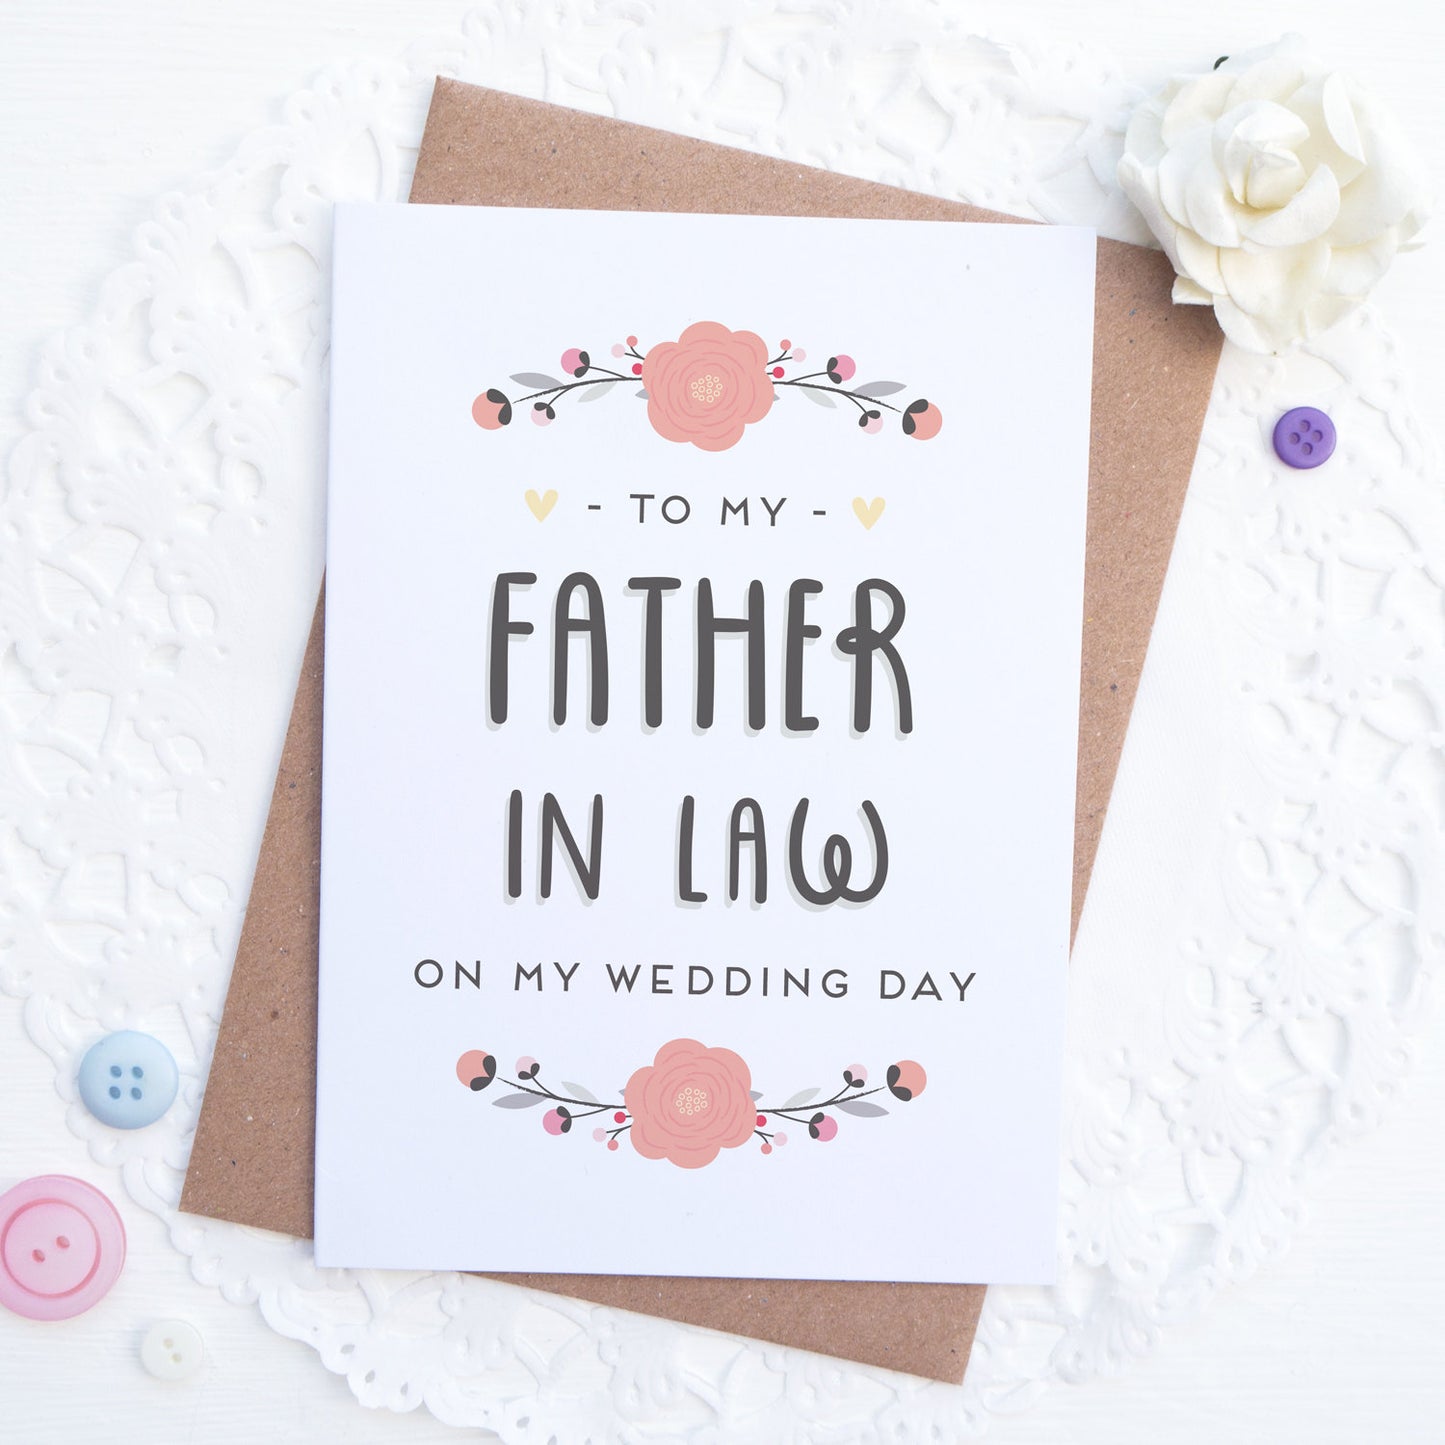 To my father in law on my wedding day card in pink